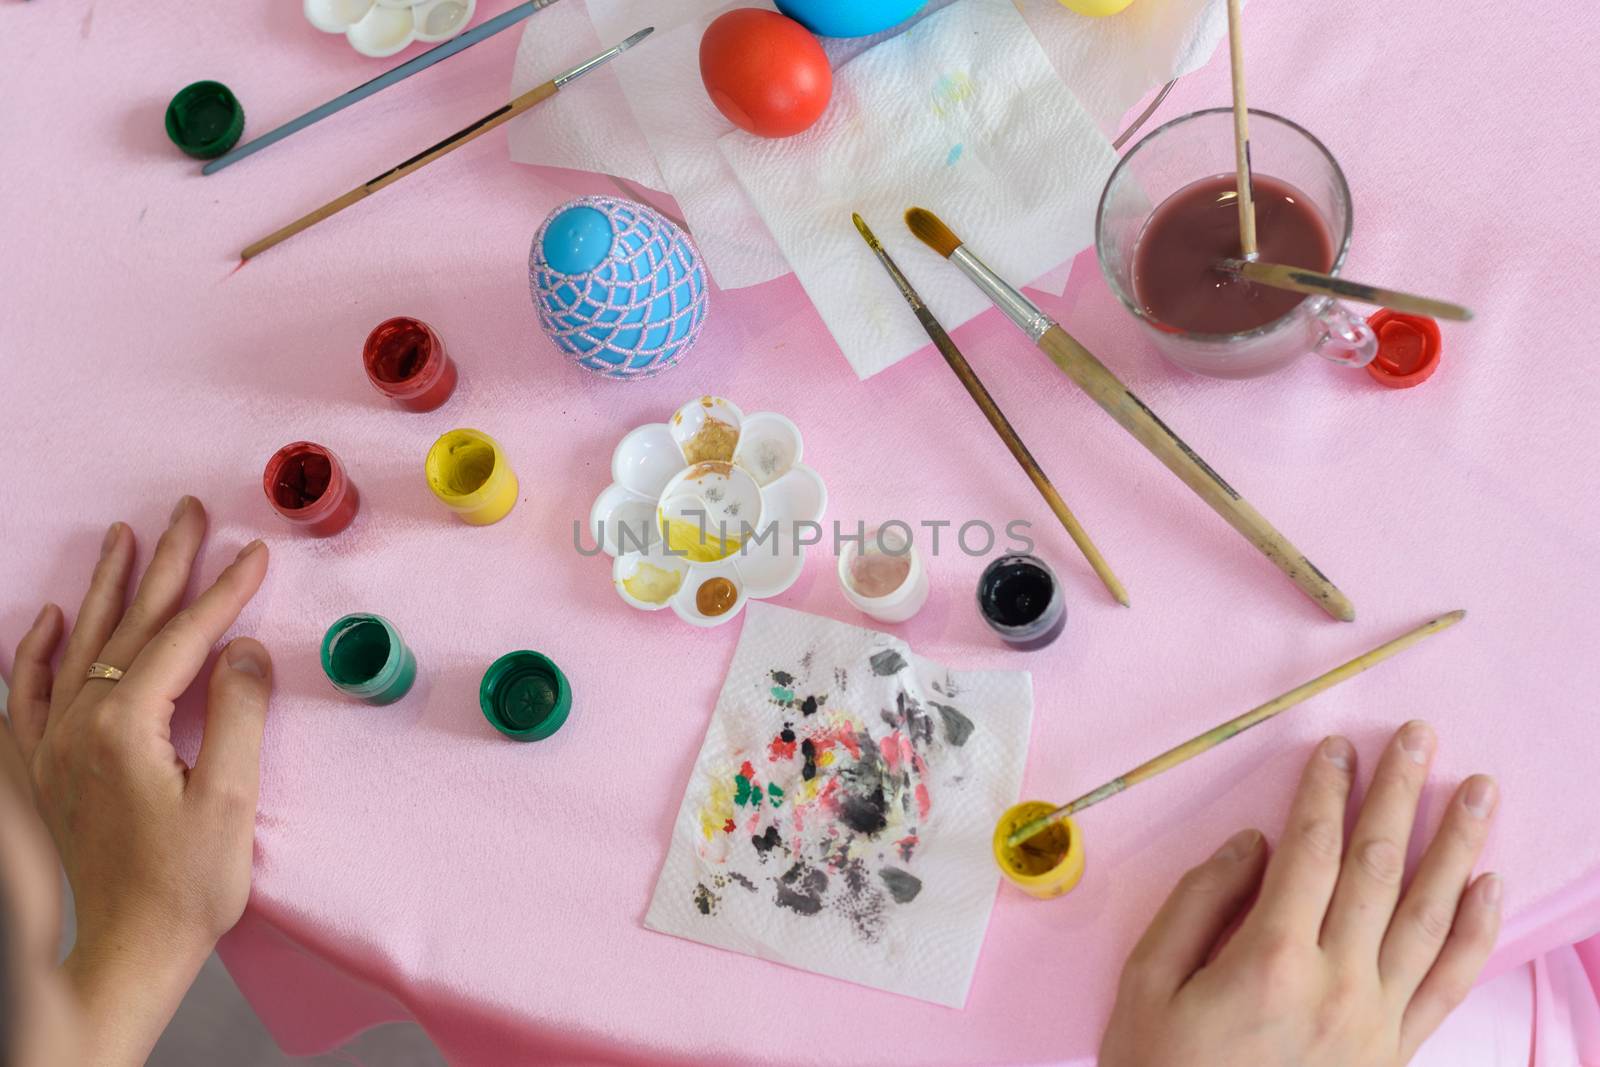 Workplace decorator painting eggs by Madhourse